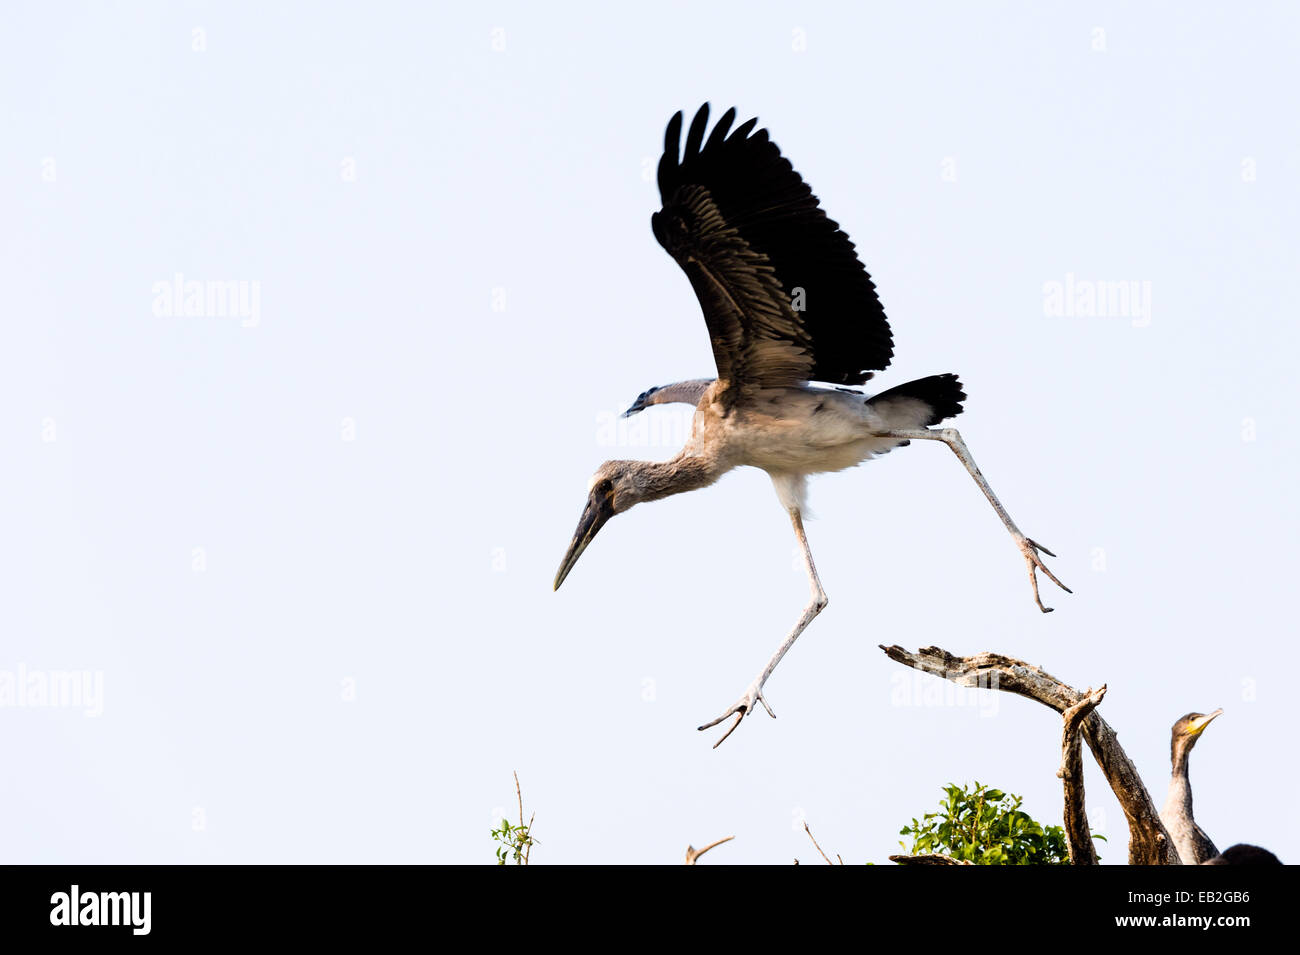 A Yellow-billed Stork chick tests it's wings in flight in a rookery. Stock Photo